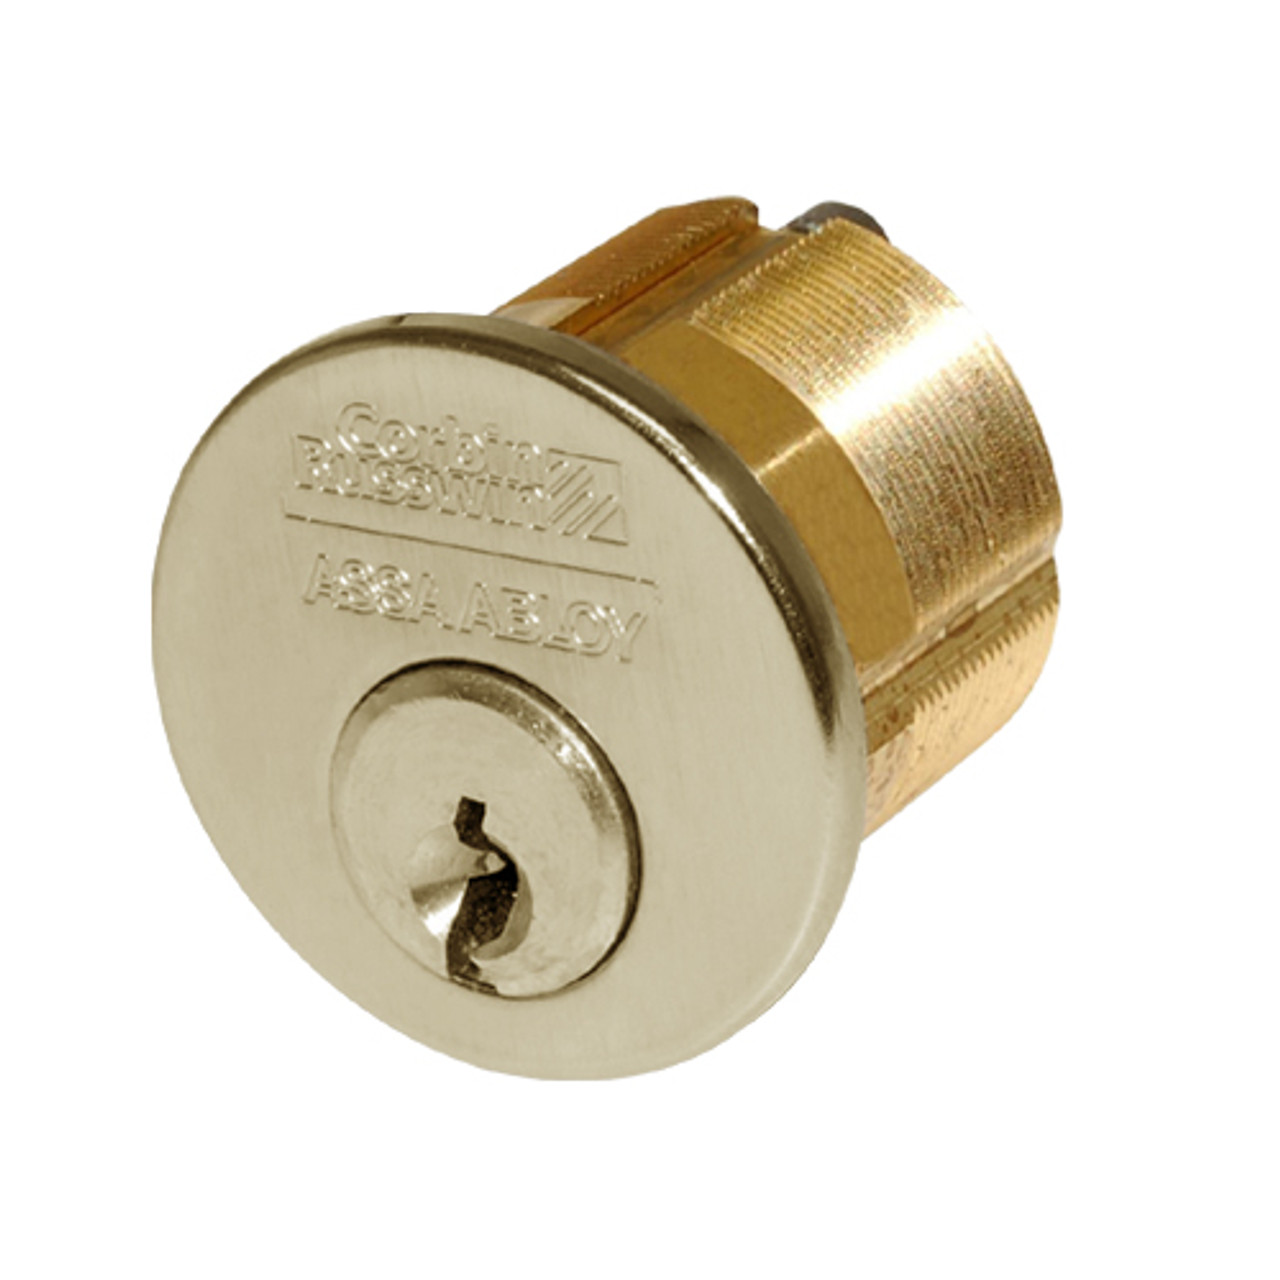 CR1000-200-A01-6-59A2-606 Corbin Conventional Mortise Cylinder for Mortise Lock and DL3000 Deadlocks with Cloverleaf Cam in Satin Brass Finish